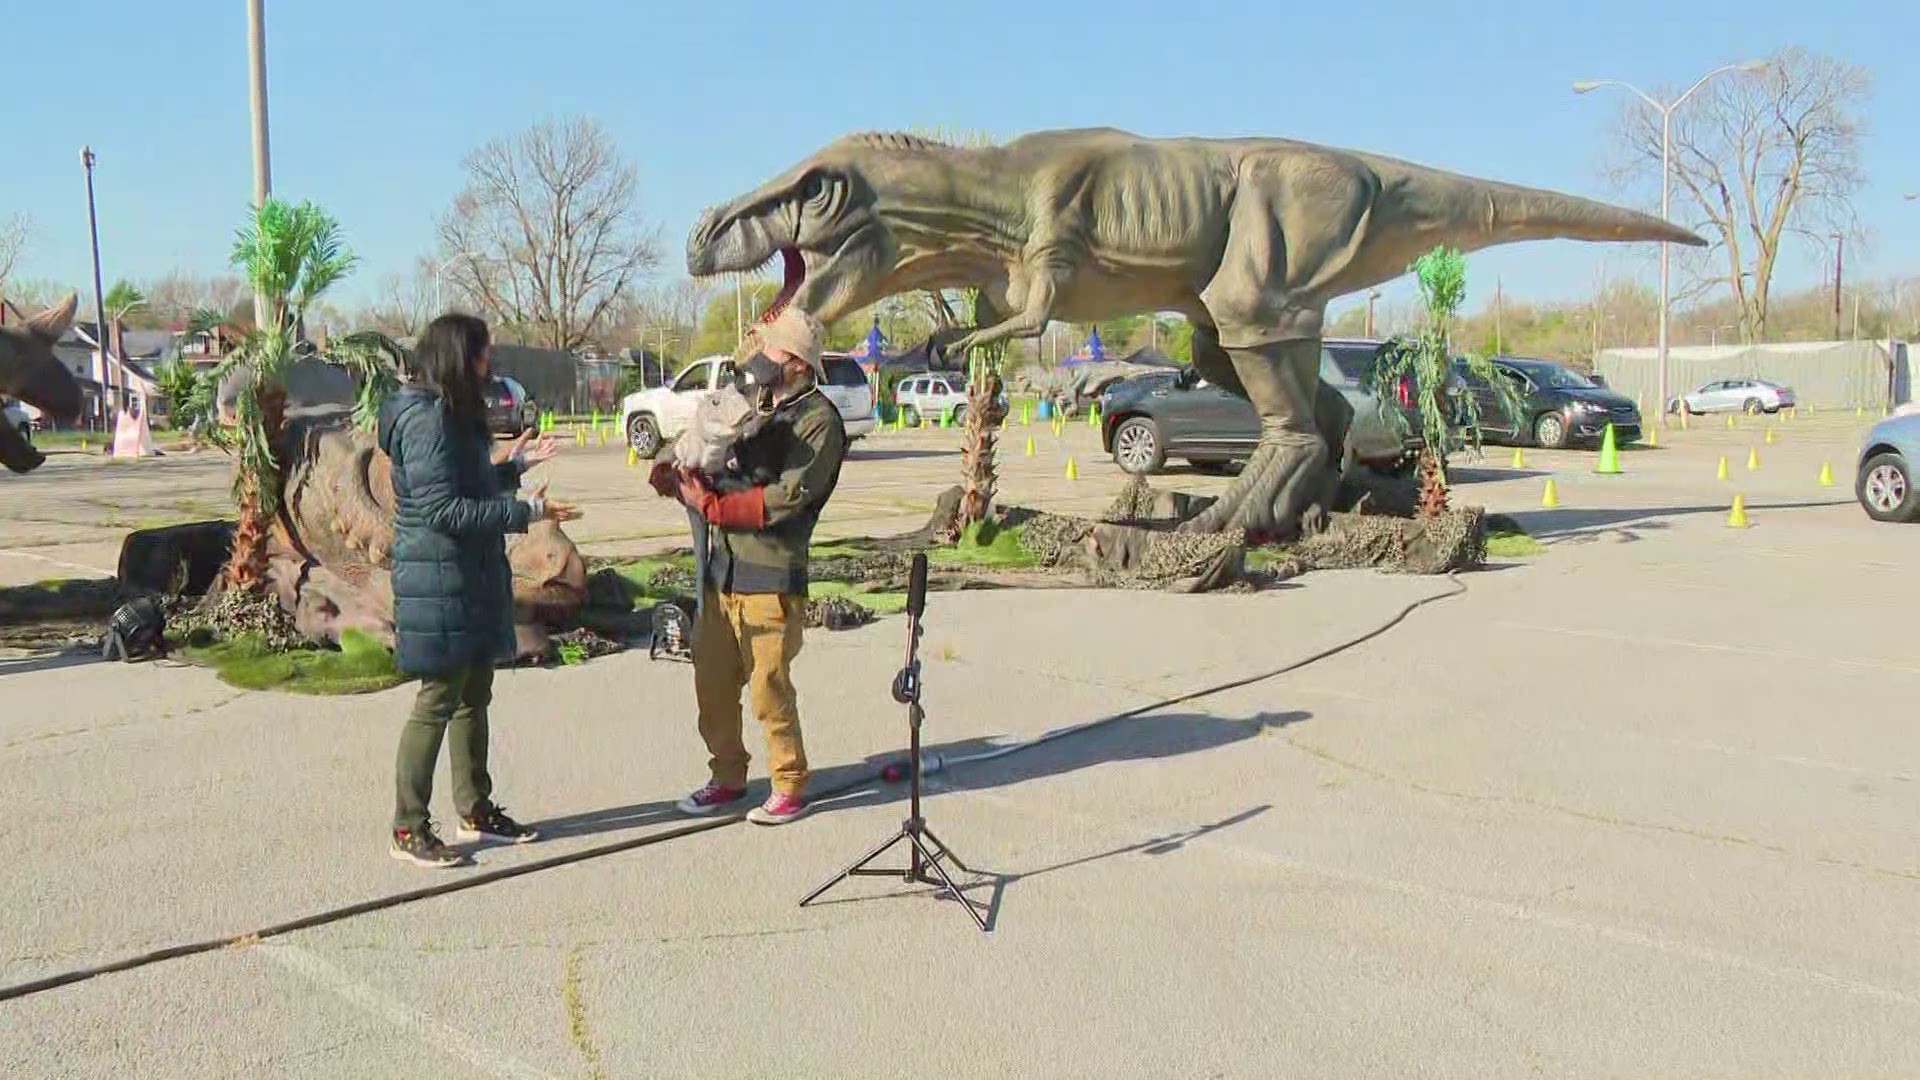 A drive-through dinosaur experience is open now at the Indiana State Fairgrounds